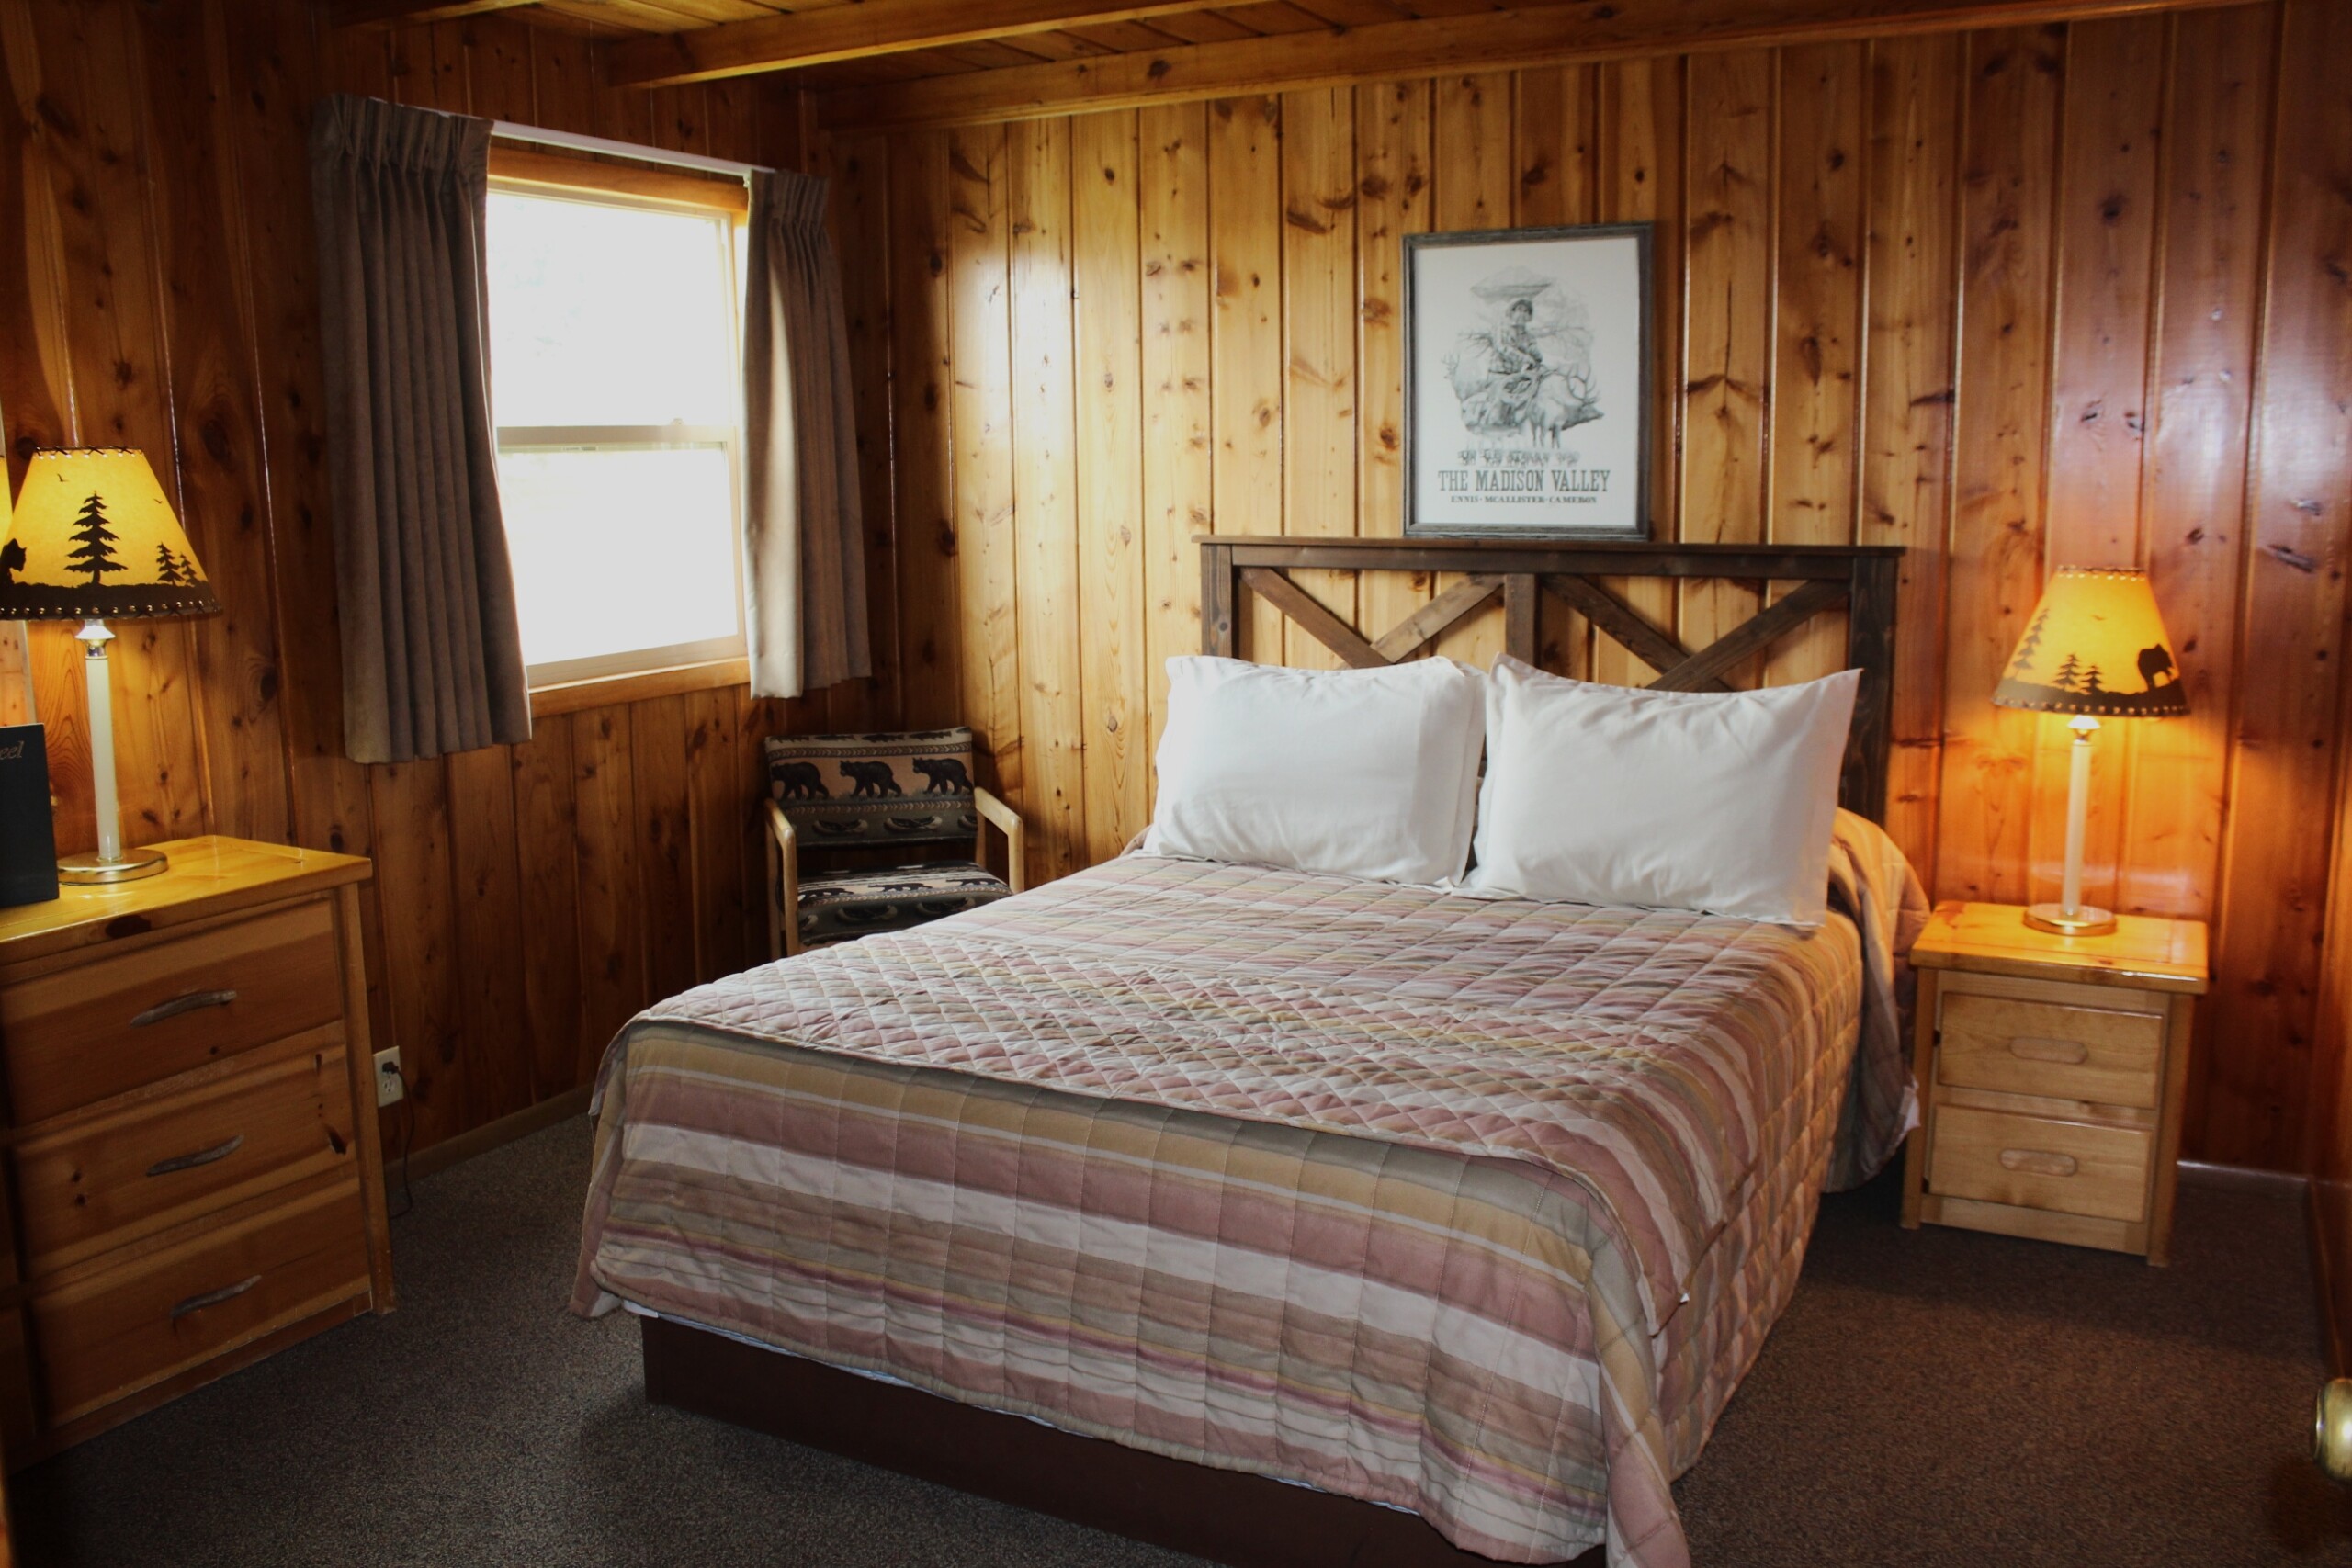 Double Queen rooms at the Rainbow Valley Lodge in Ennis Montana